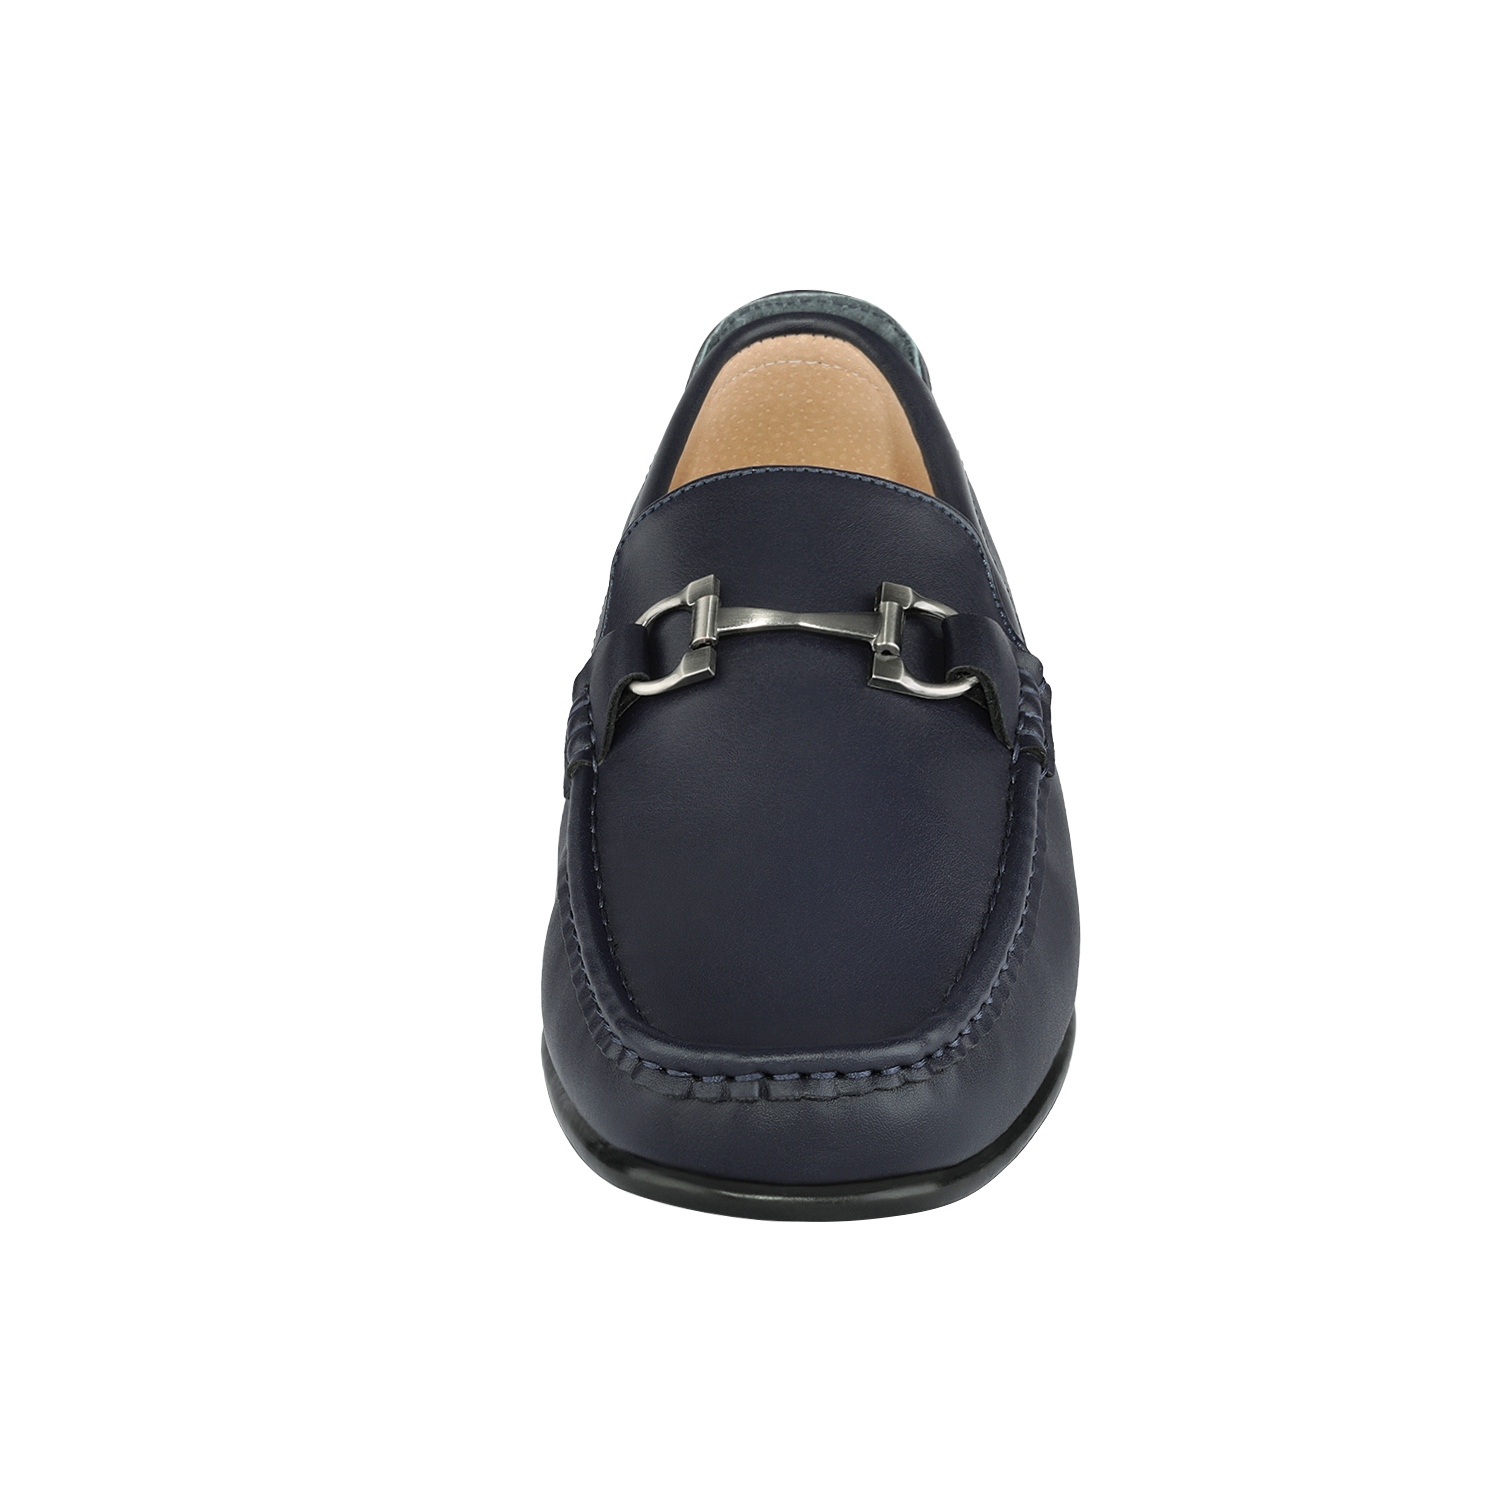 Bruno Marc Men's Moccasin Loafer Shoes Men Dress Loafers Slip On Casual Penny Comfort Outdoor Loafers HENRY-1 NAVY Size 12 - image 2 of 5